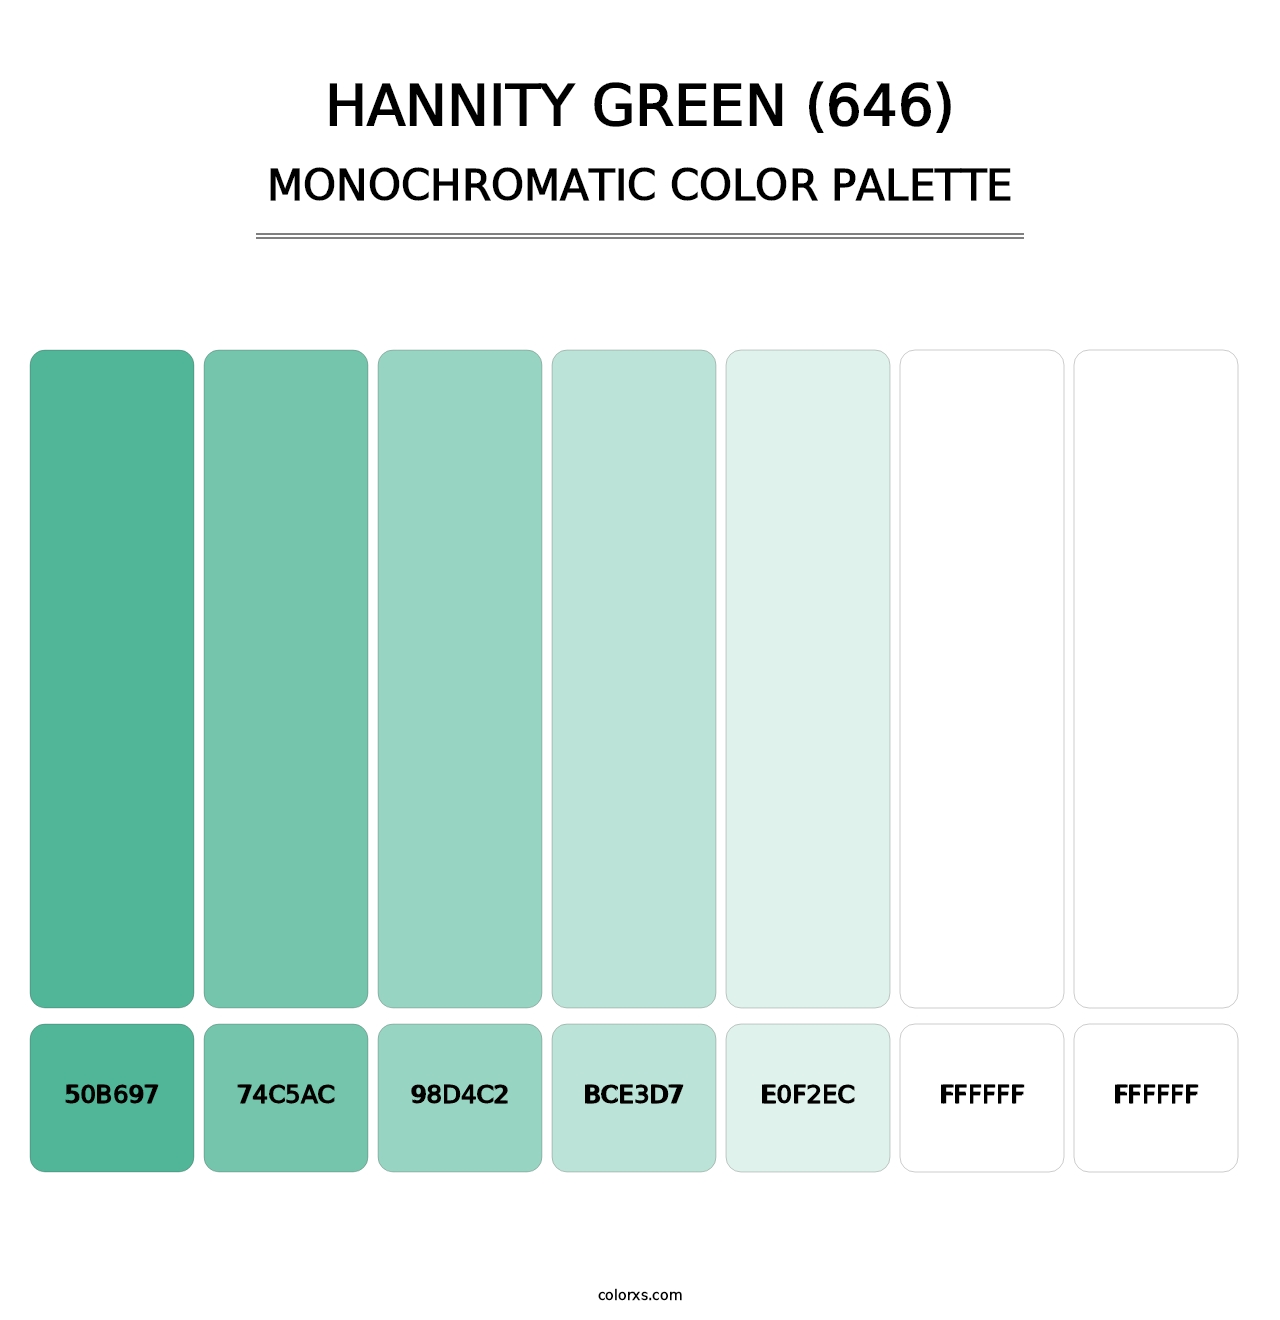 Hannity Green (646) - Monochromatic Color Palette